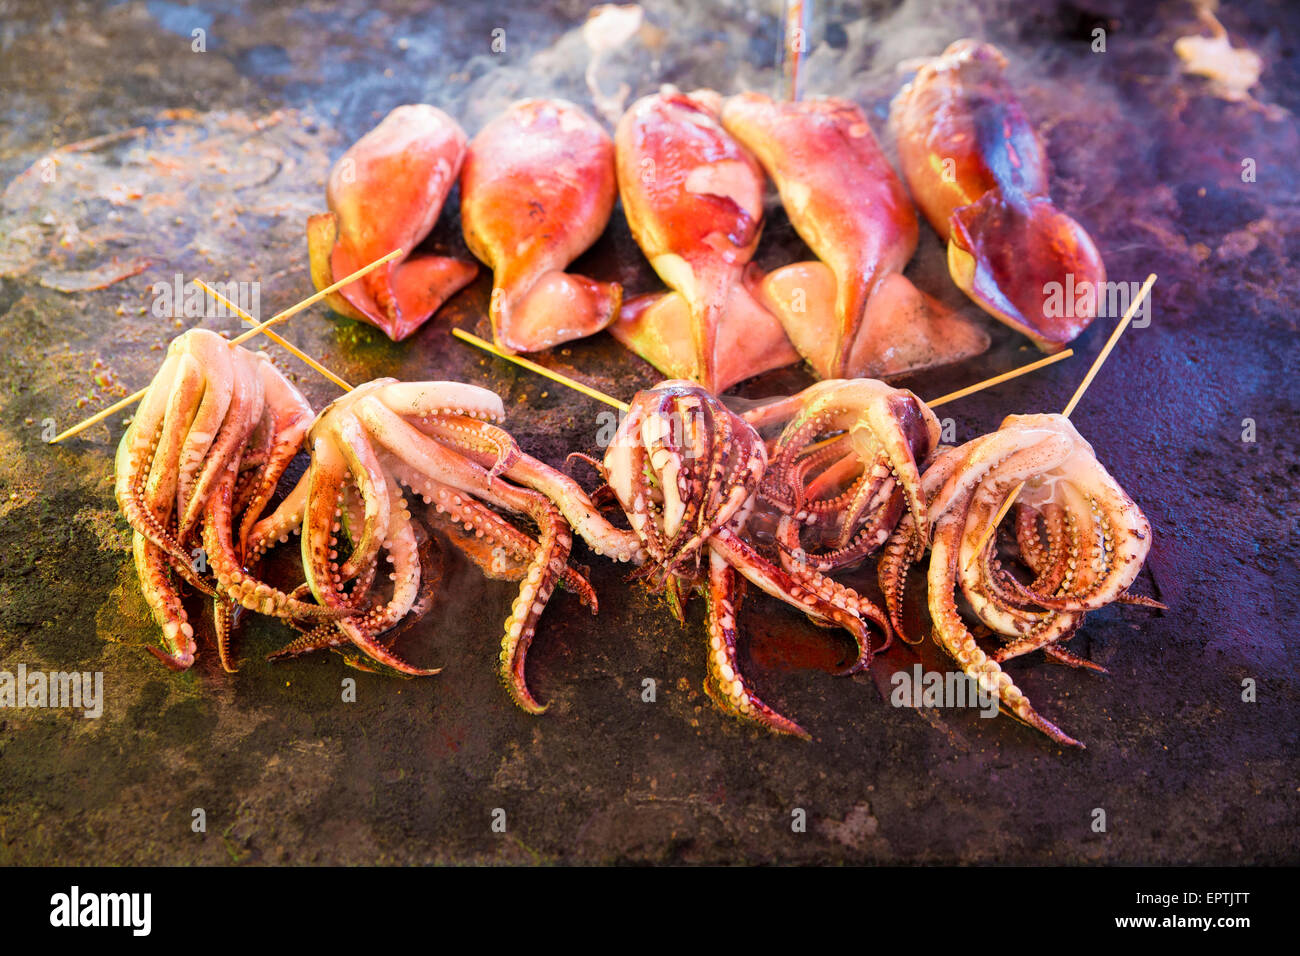 Japanese street food (a big part of Japanese culture) Stock Photo